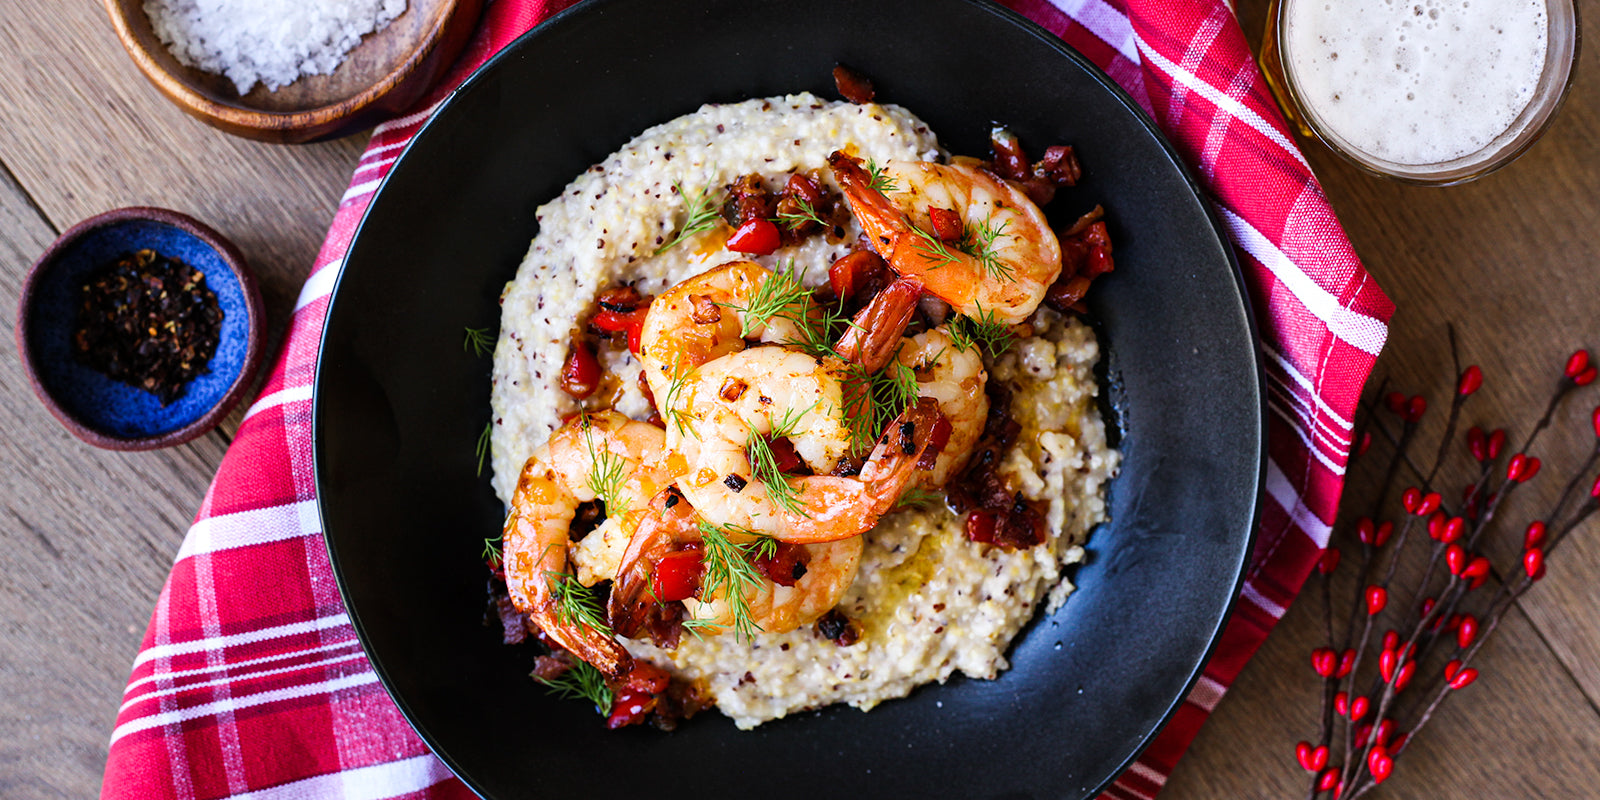 Shrimp and Grits Foodocracy Style